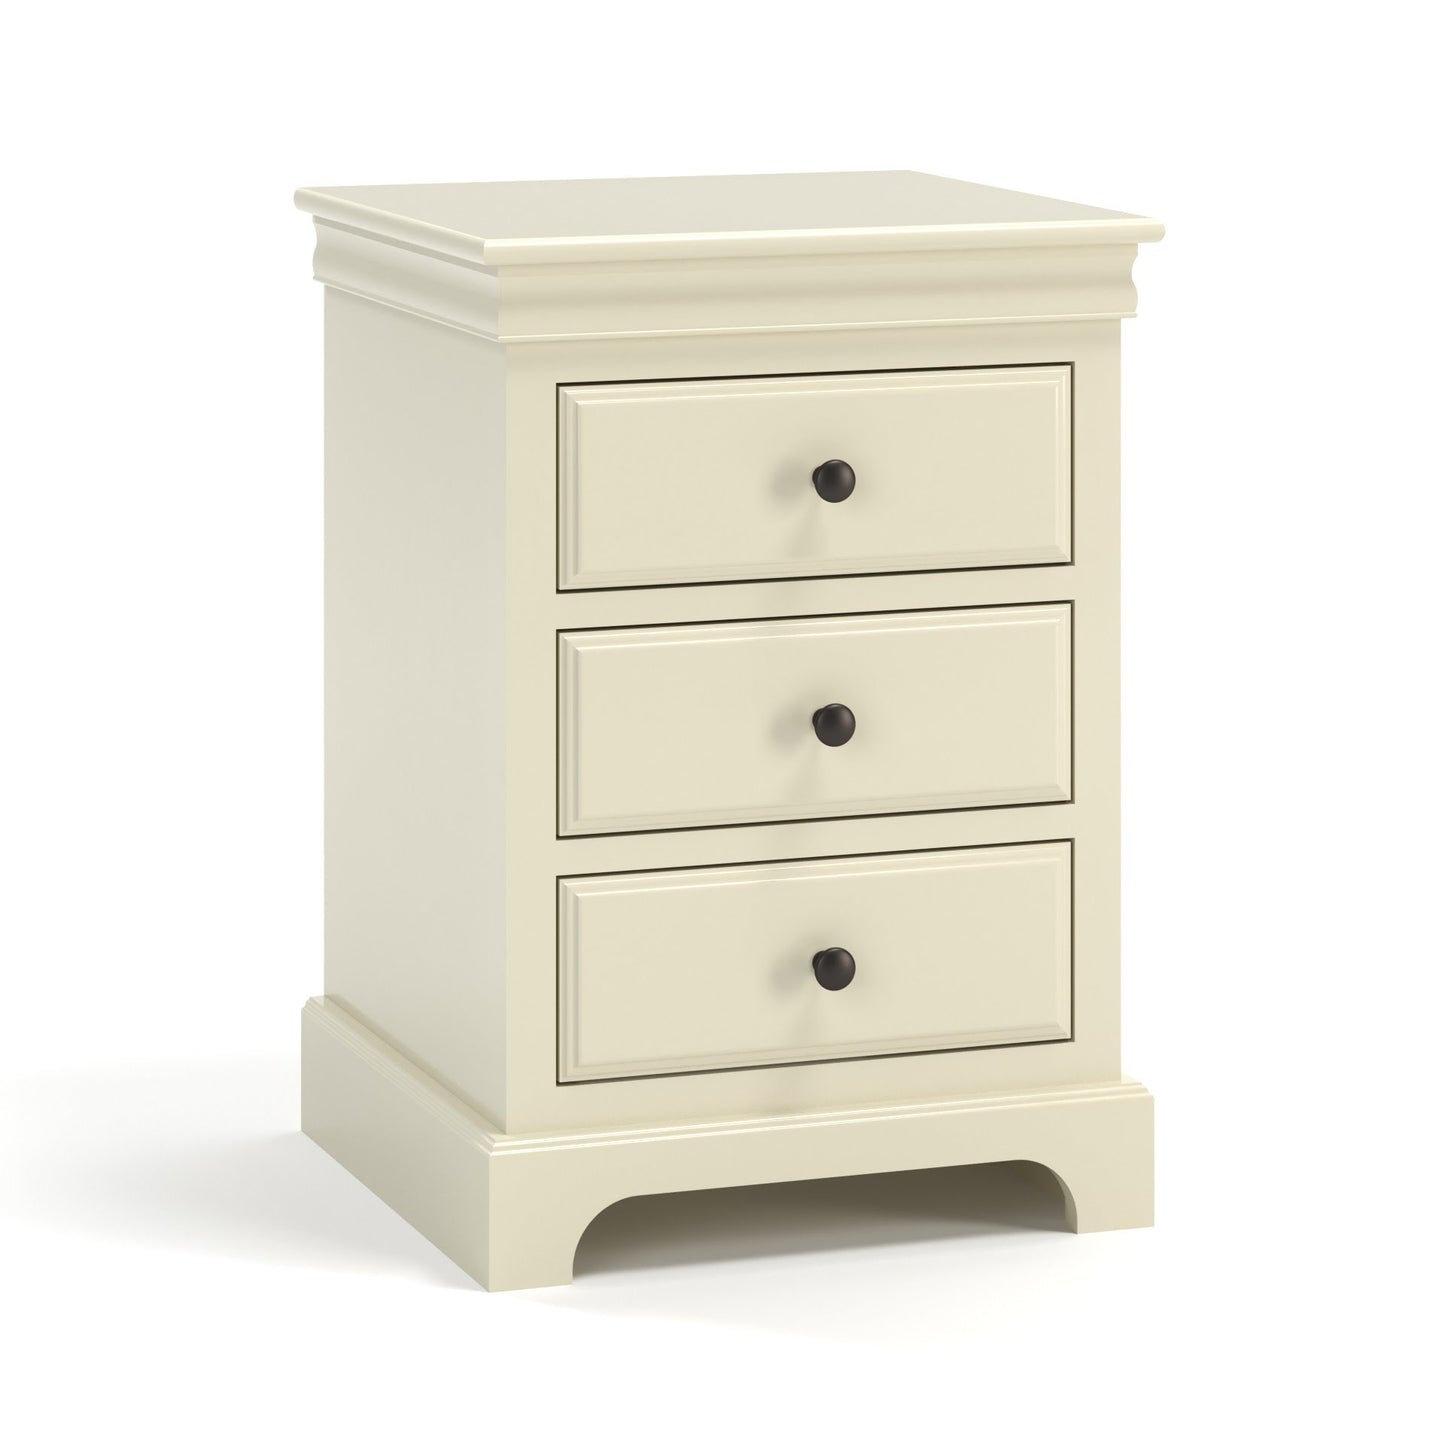 Acadia Madison Three Drawer Nightstand built from birch with crown molding and three full extension drawers. Pictured in Linen finish.